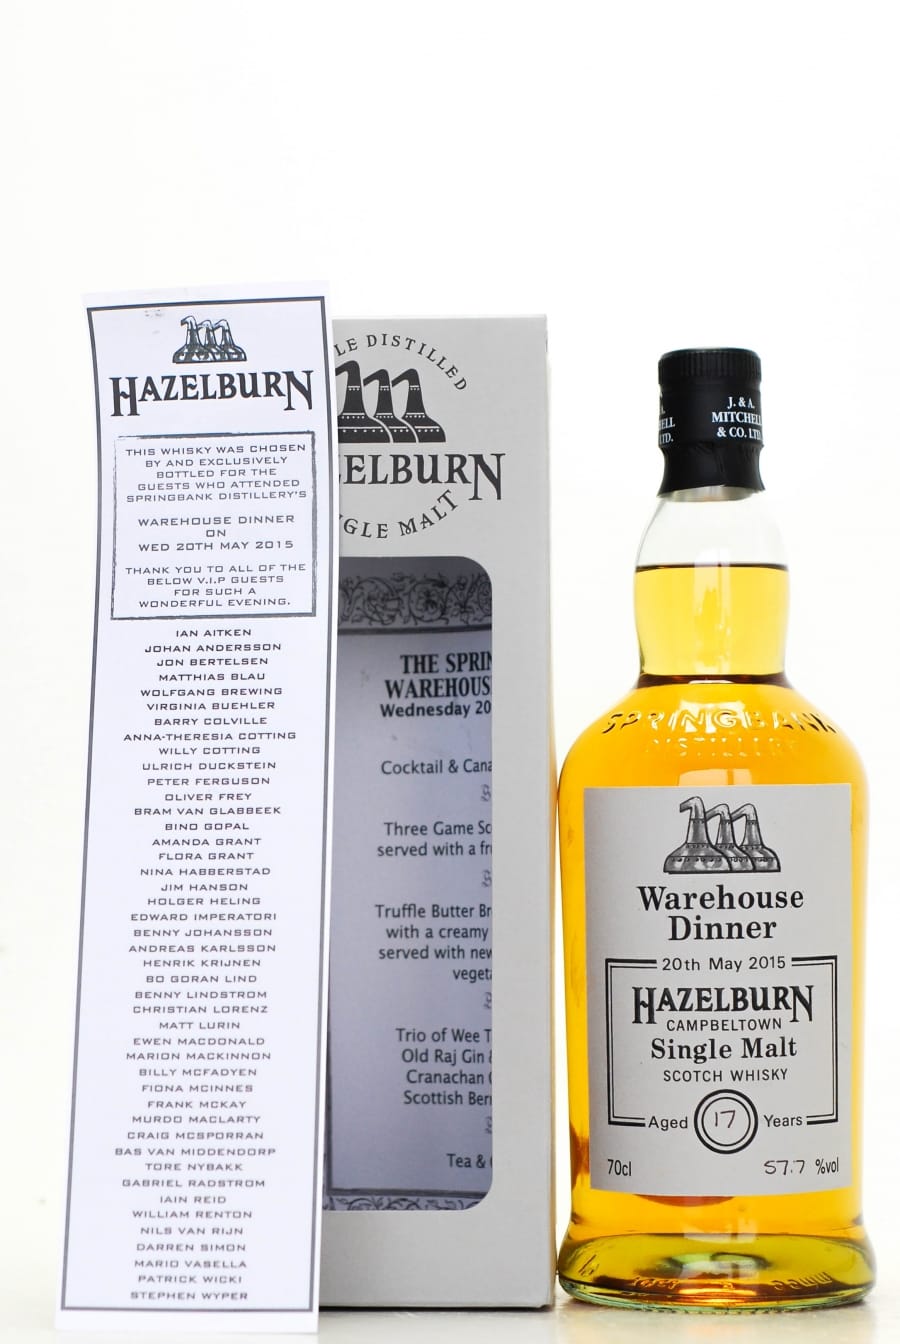 Hazelburn - 17 Years Old Specially Selected For the Warehouse Dinner, 20th May 2015 1 Of 45 Bottles 57.7% 1997 In Original Container